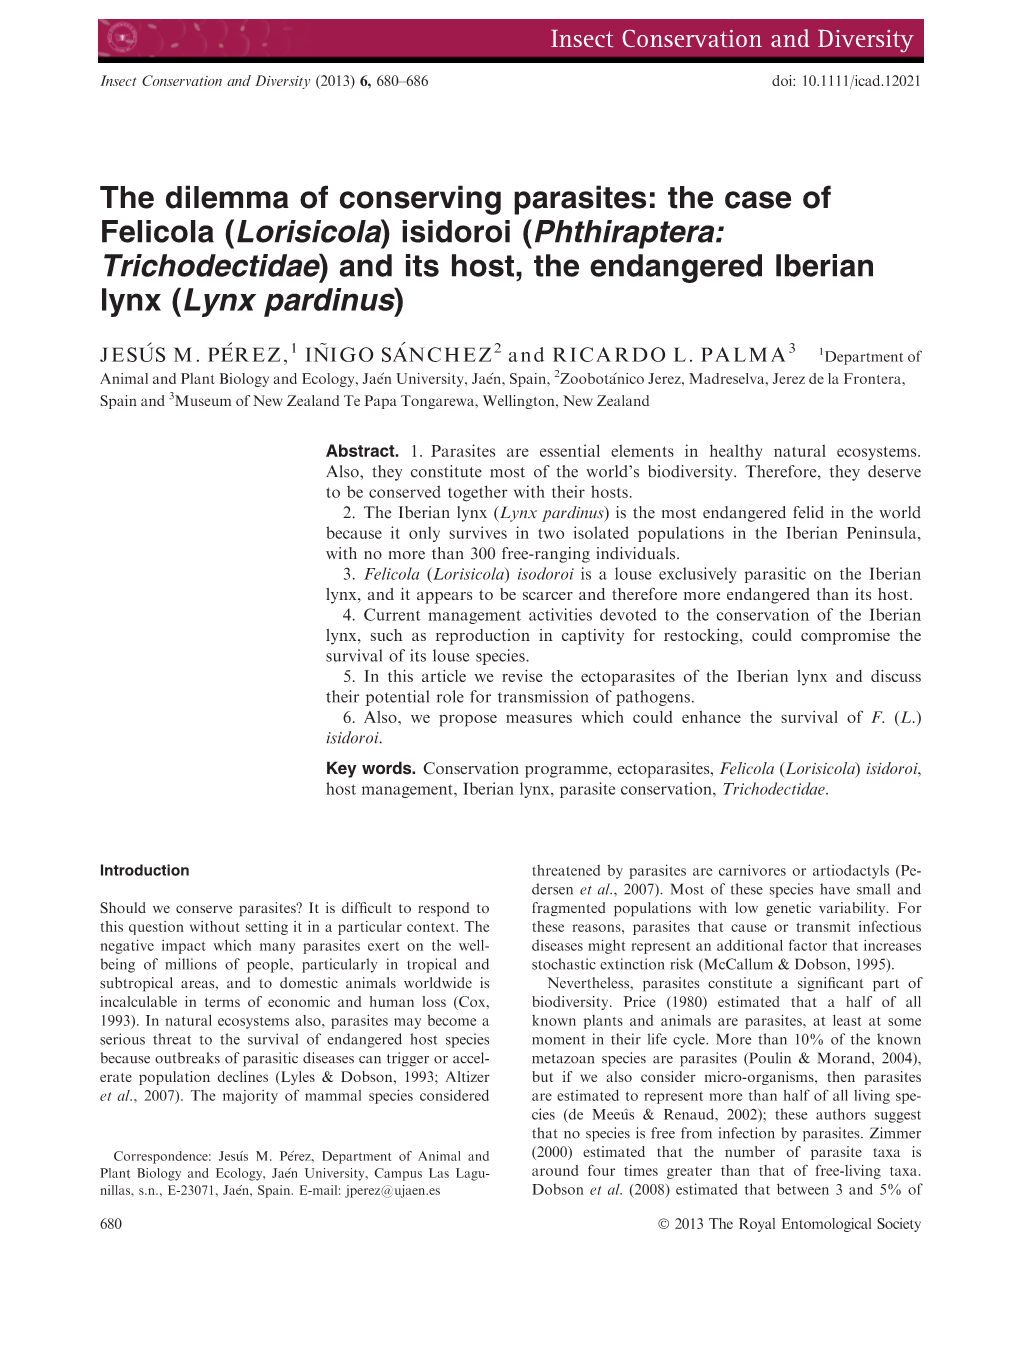 The Dilemma of Conserving Parasites: the Case of Felicola